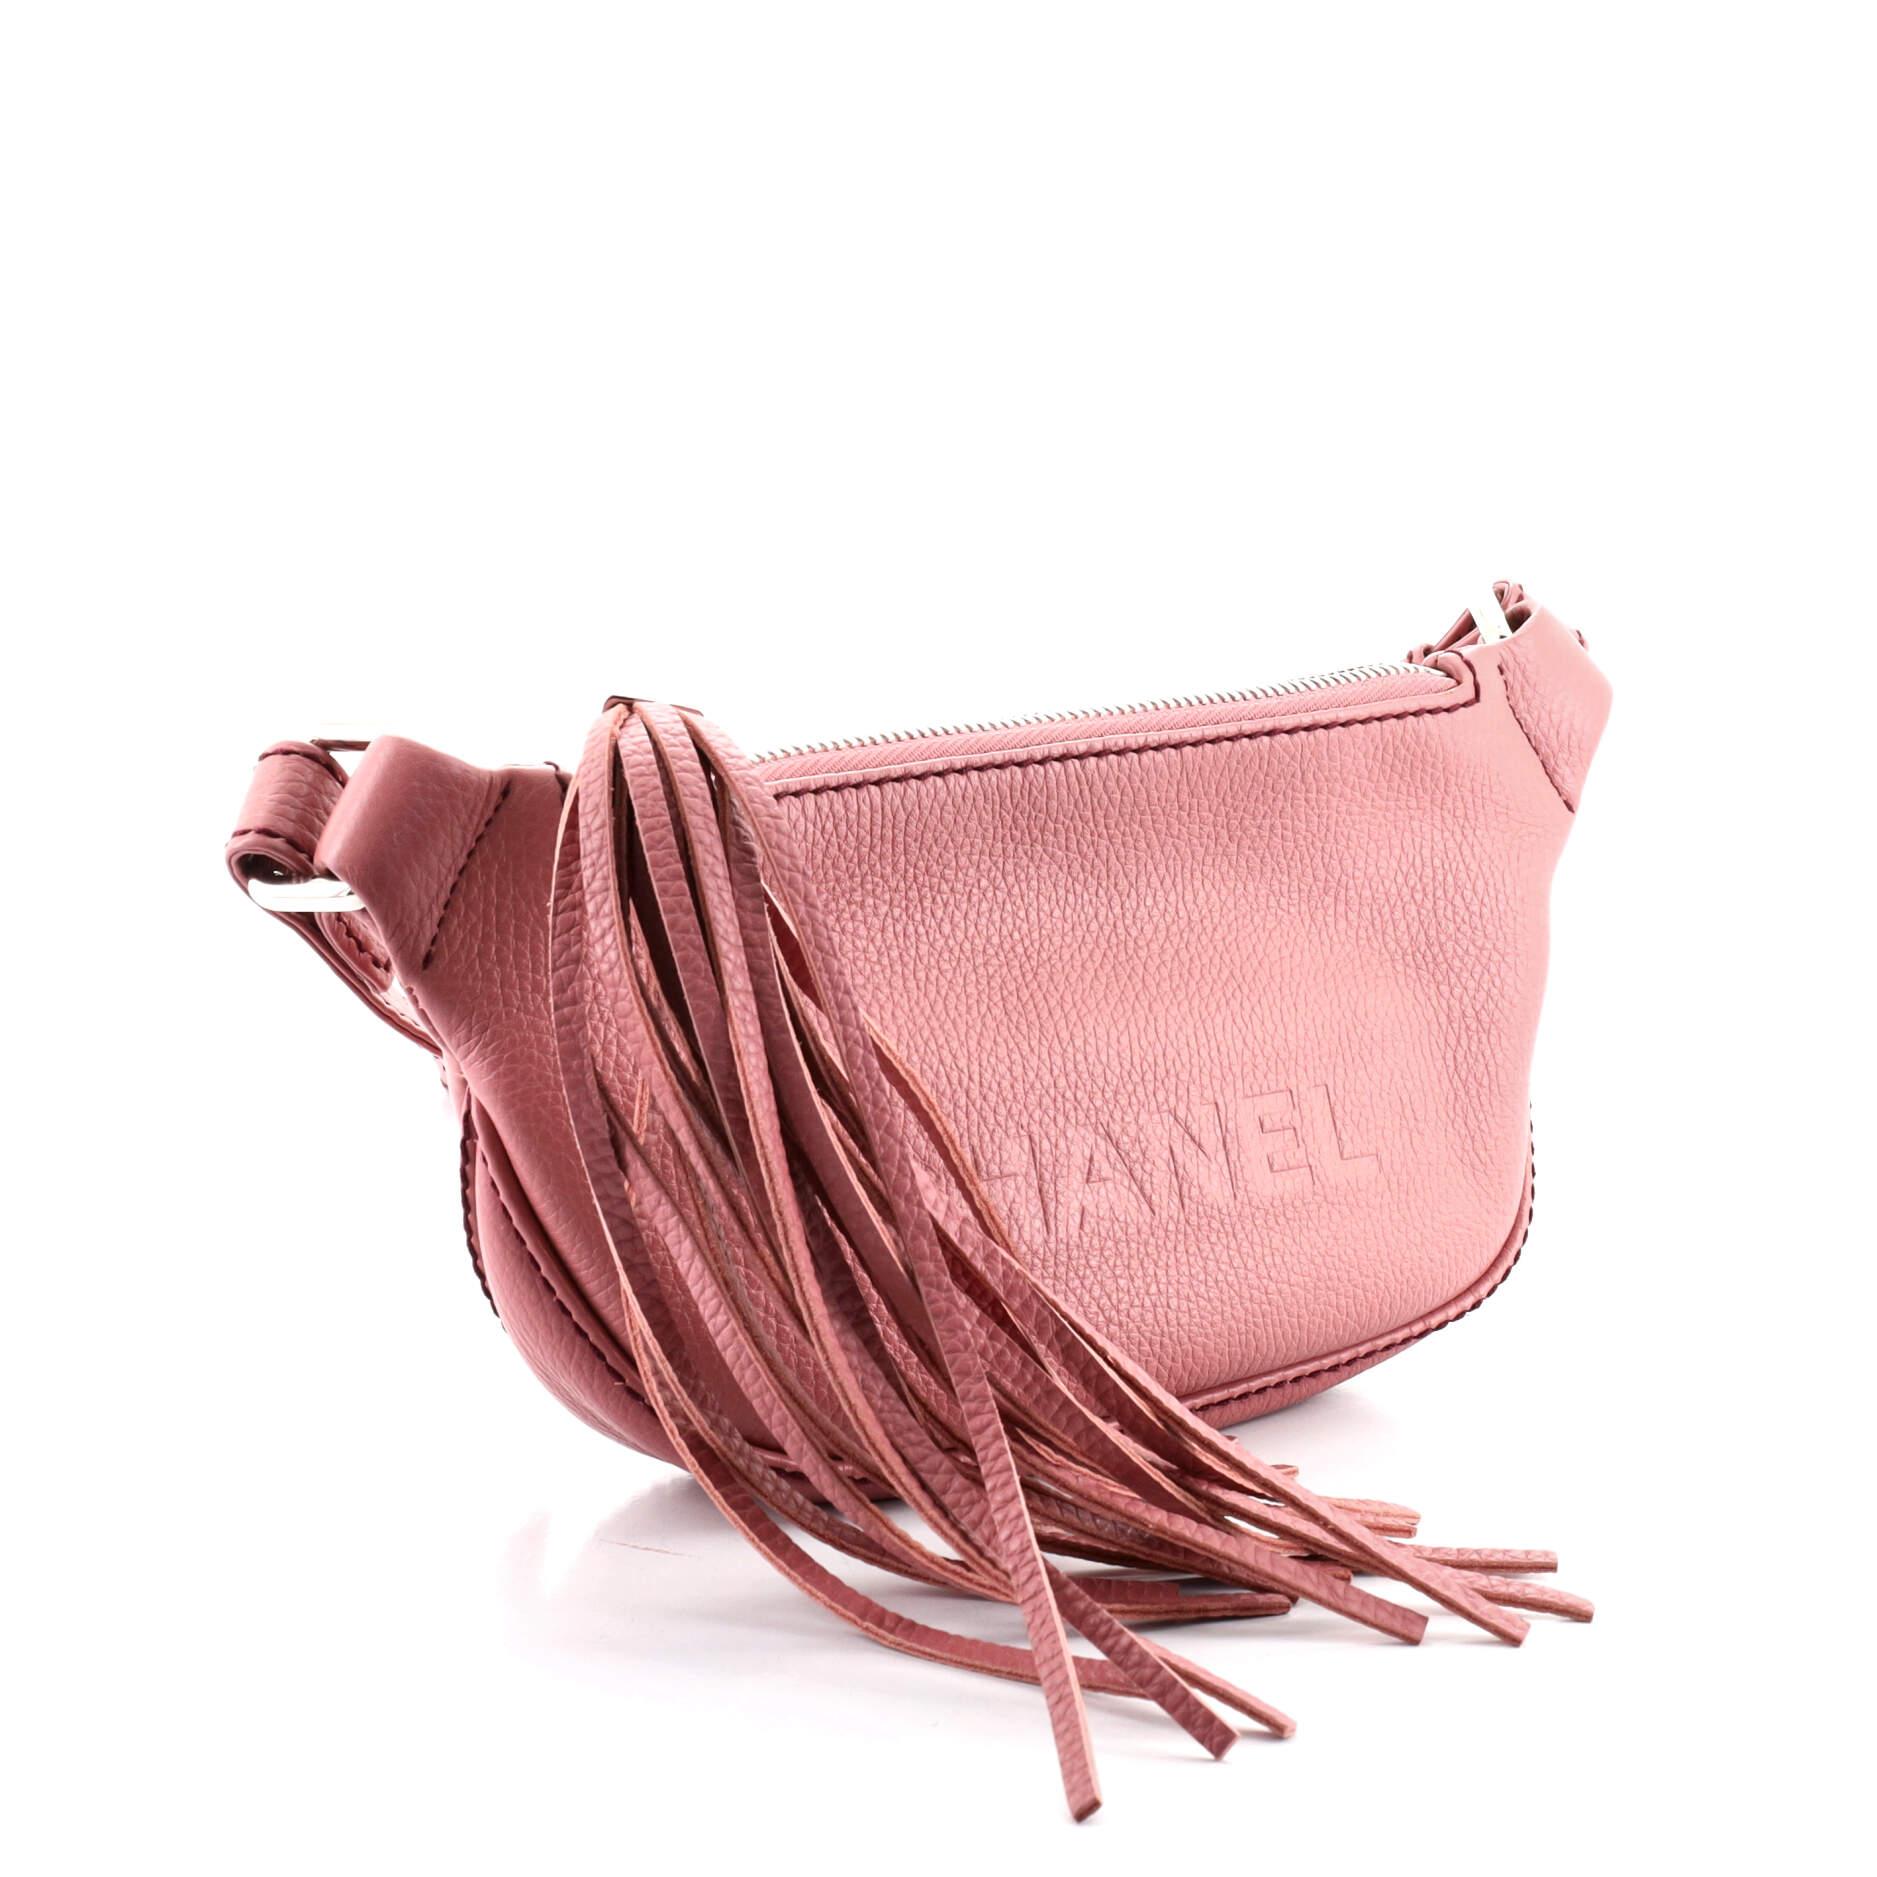 Pink Chanel Lax Crossbody Bag Pebbled Leather